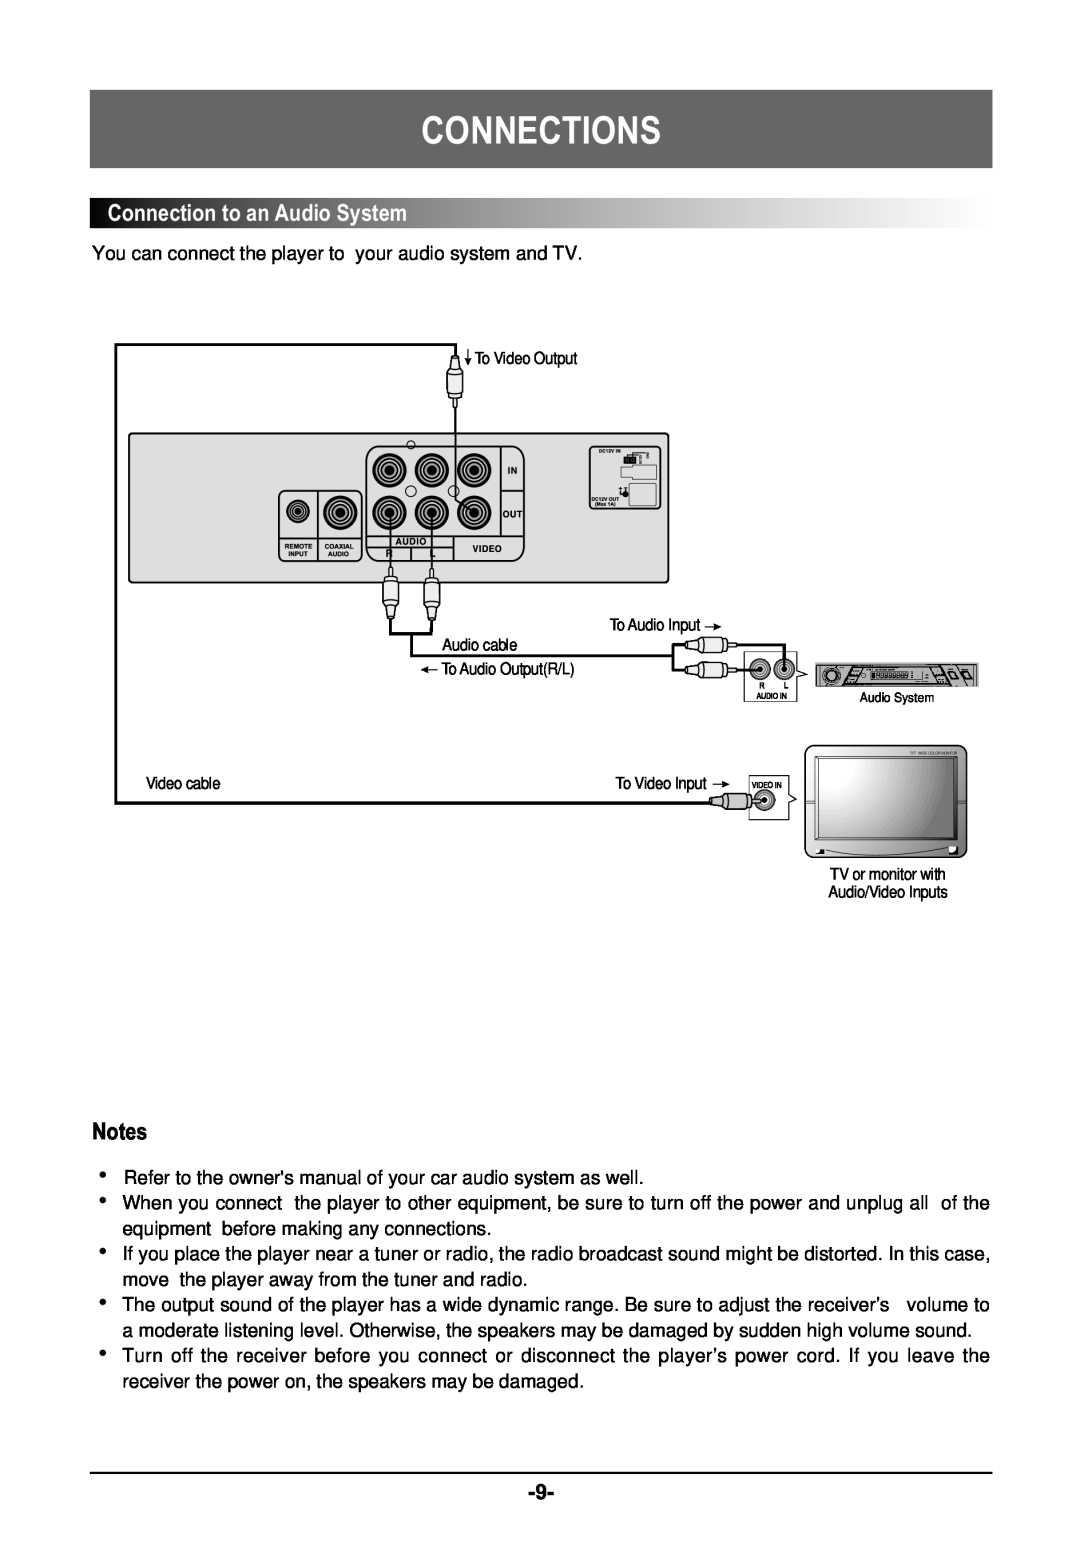 Farenheit Technologies DVD-19 ConnectiontoanAudioSystem, Connections, To Video Output, Audio cable, To Audio OutputR/L 